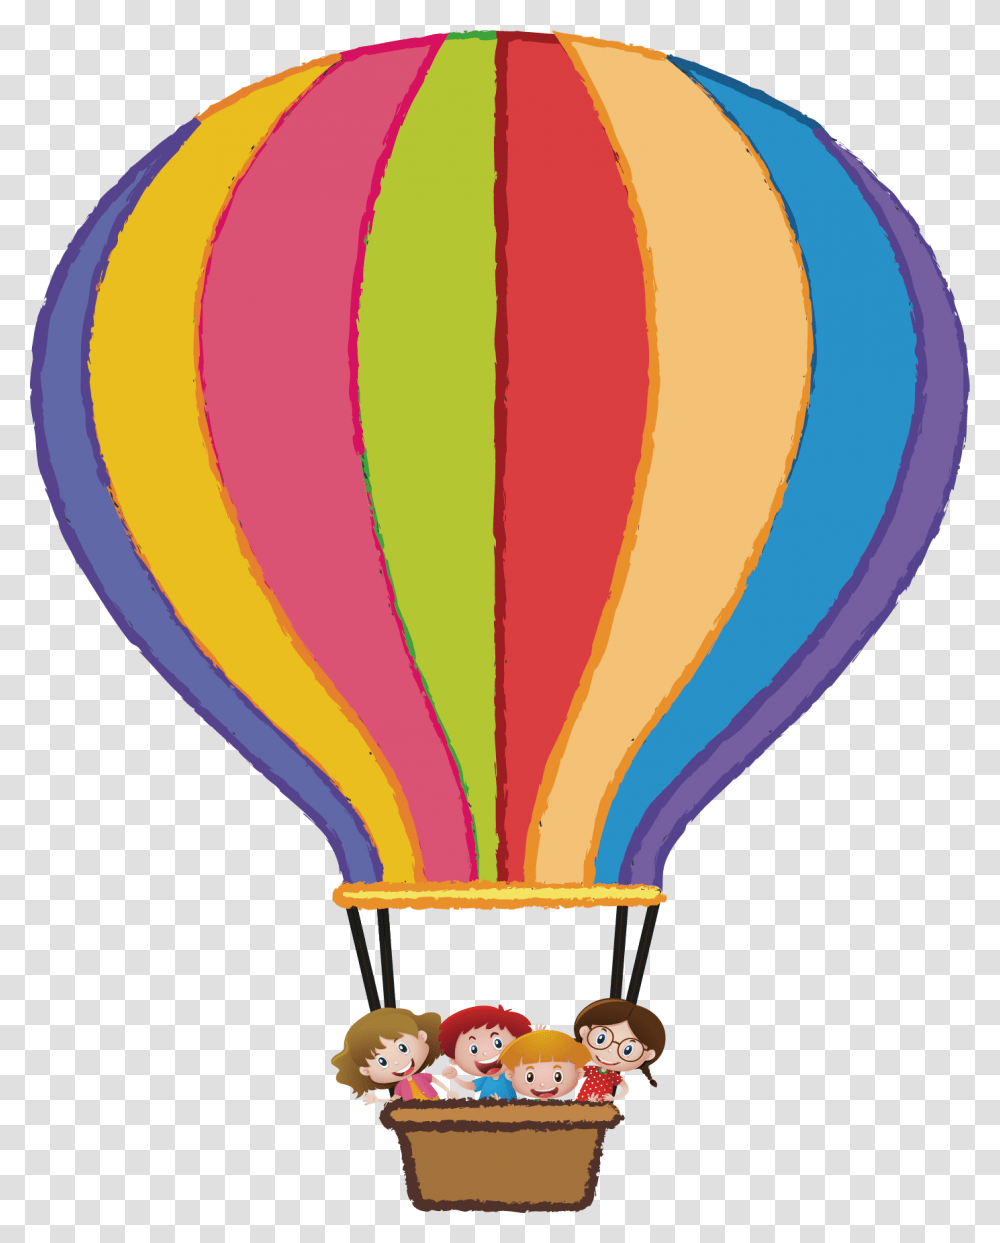 Playing Objects Of Kids Vector Hot Air Balloon With Fire Clip Art, Aircraft, Vehicle, Transportation Transparent Png